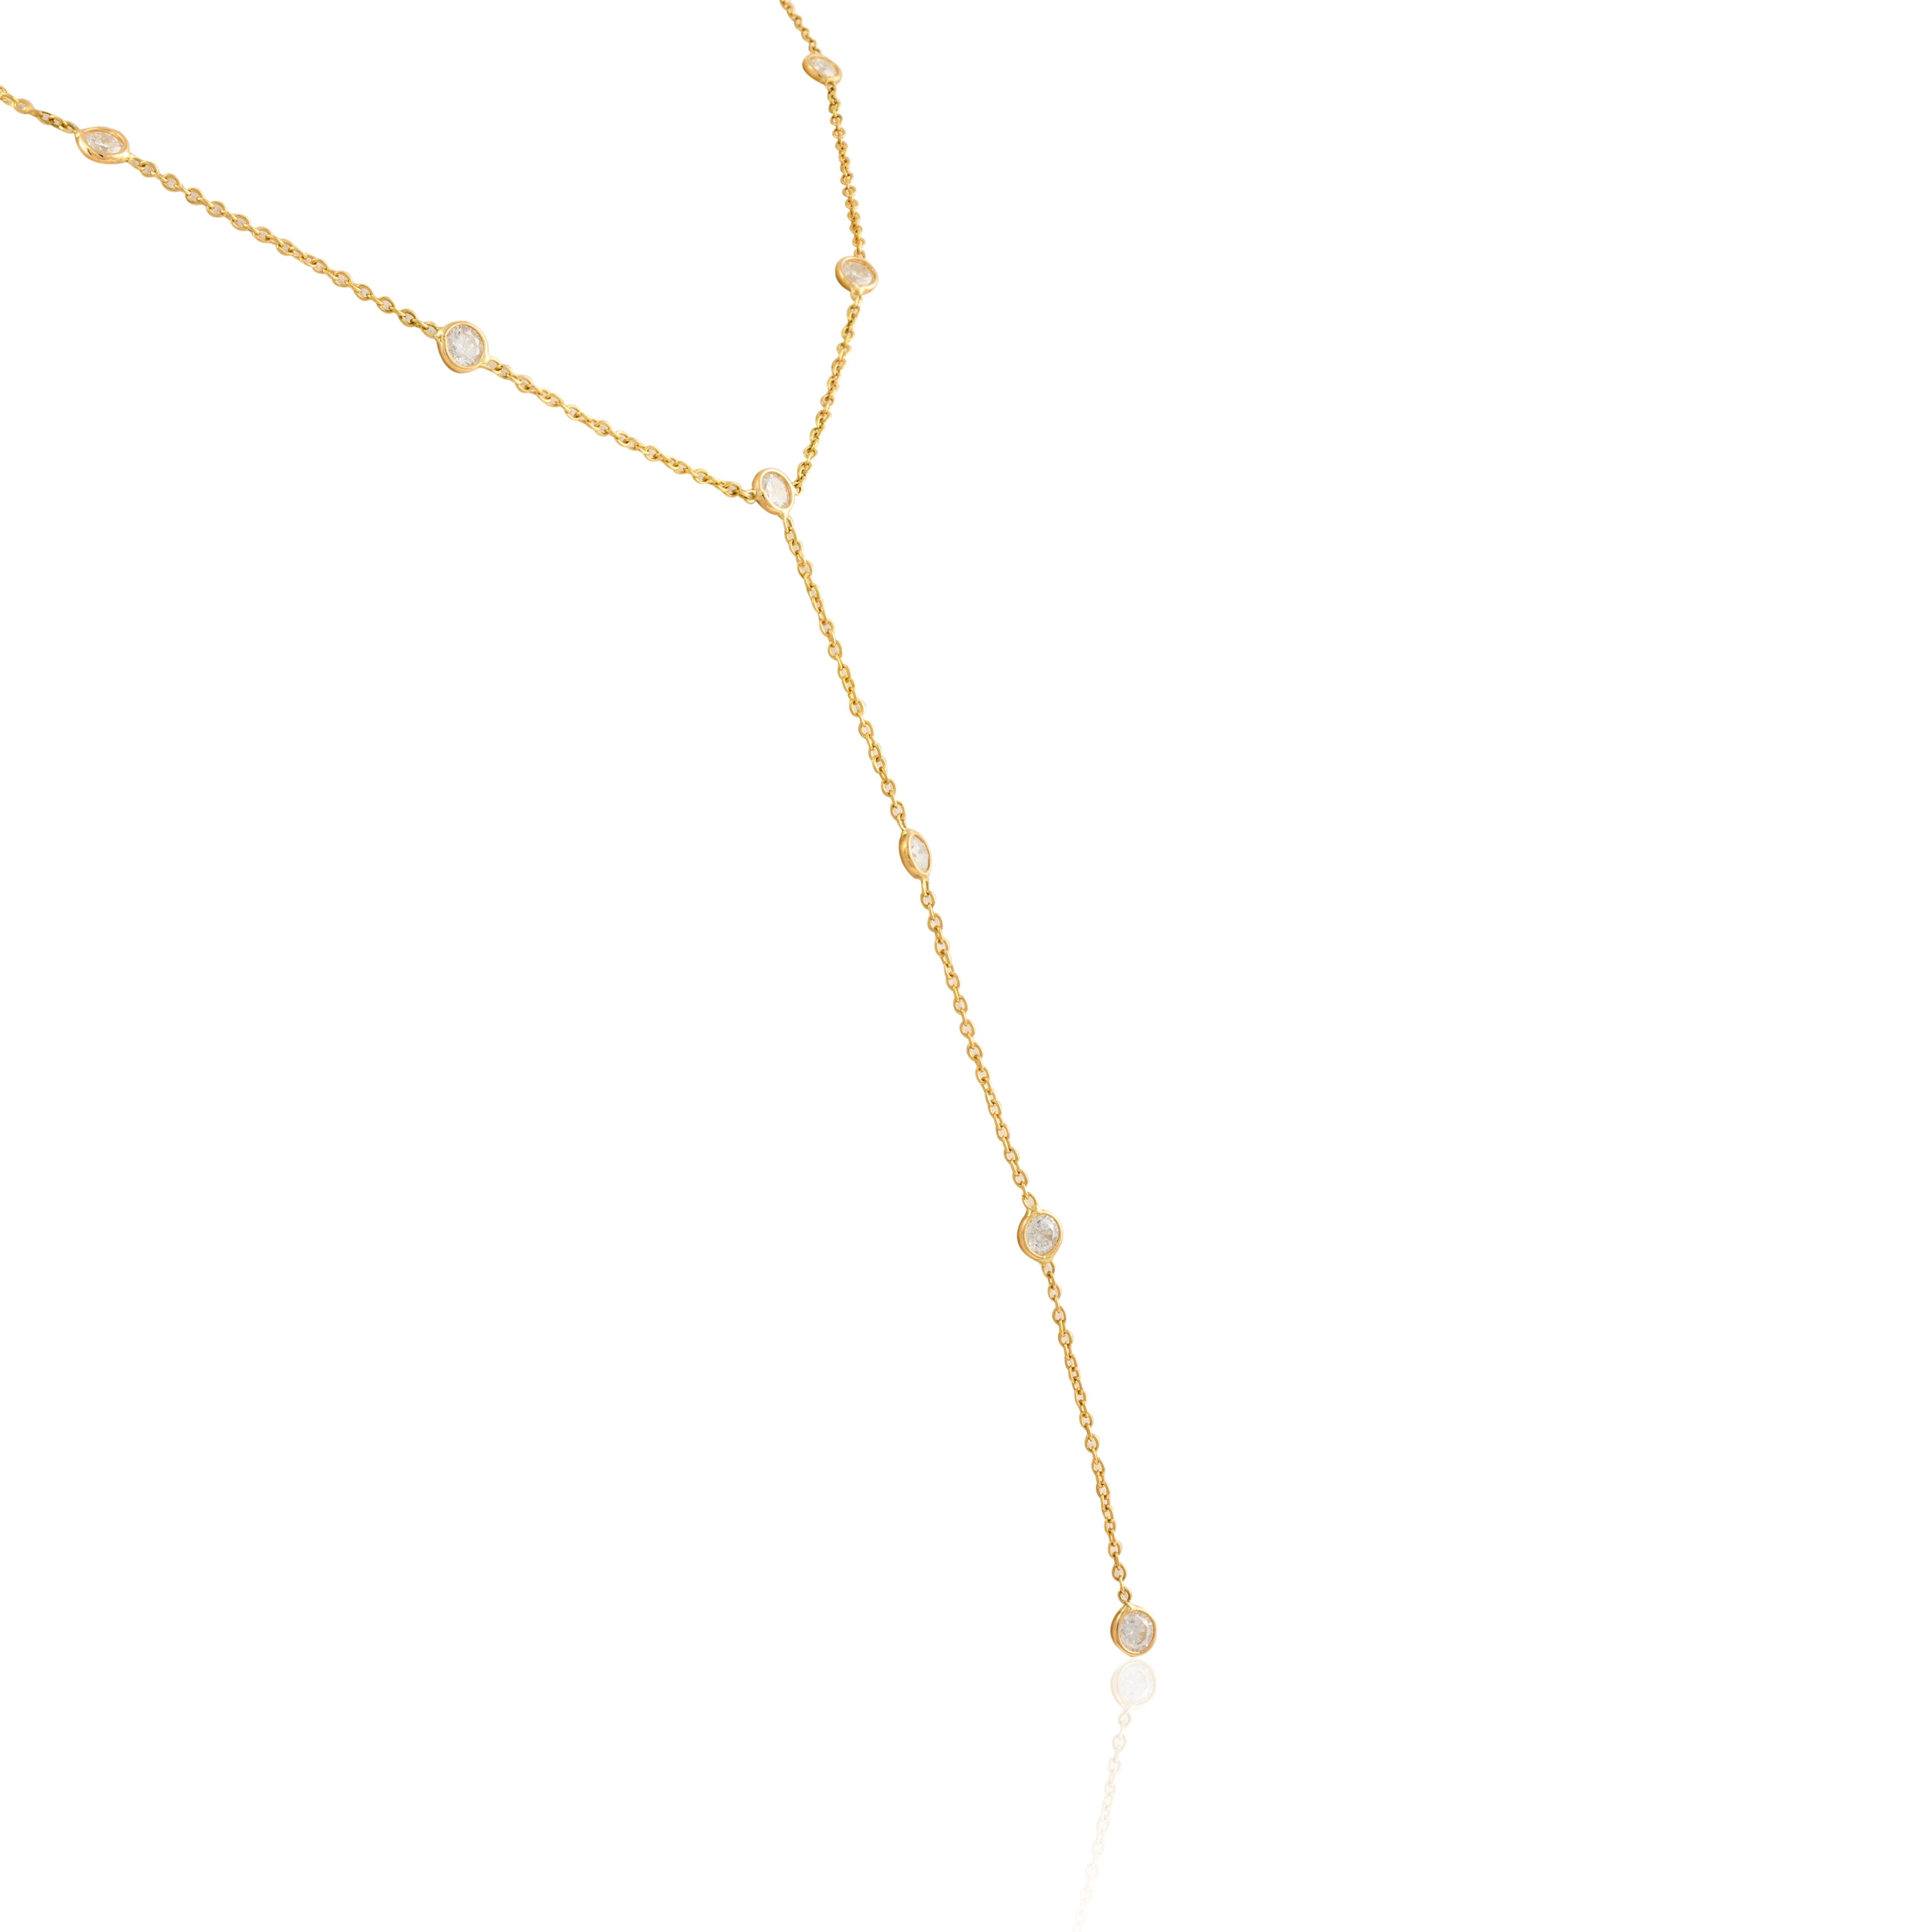 Modernist 18kt Solid Yellow Gold 1 CTW Diamond Lariat Necklace, Gift For Her Christmas For Sale